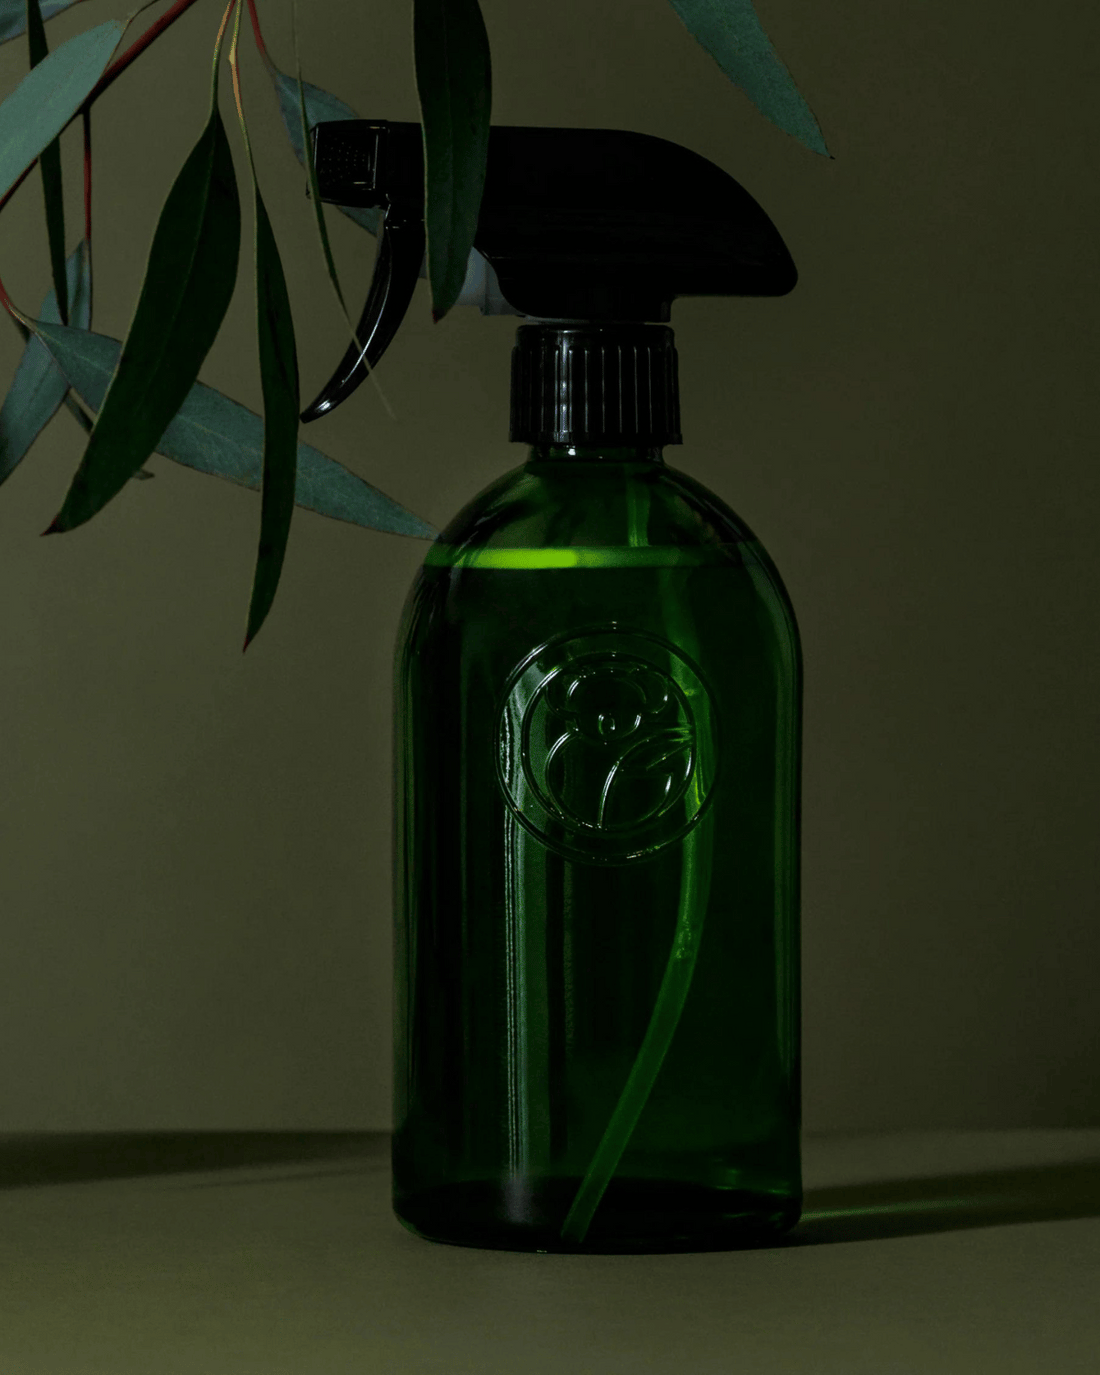 Apothecary Glass Bottle with Spray Trigger by Koala Eco (500ml)